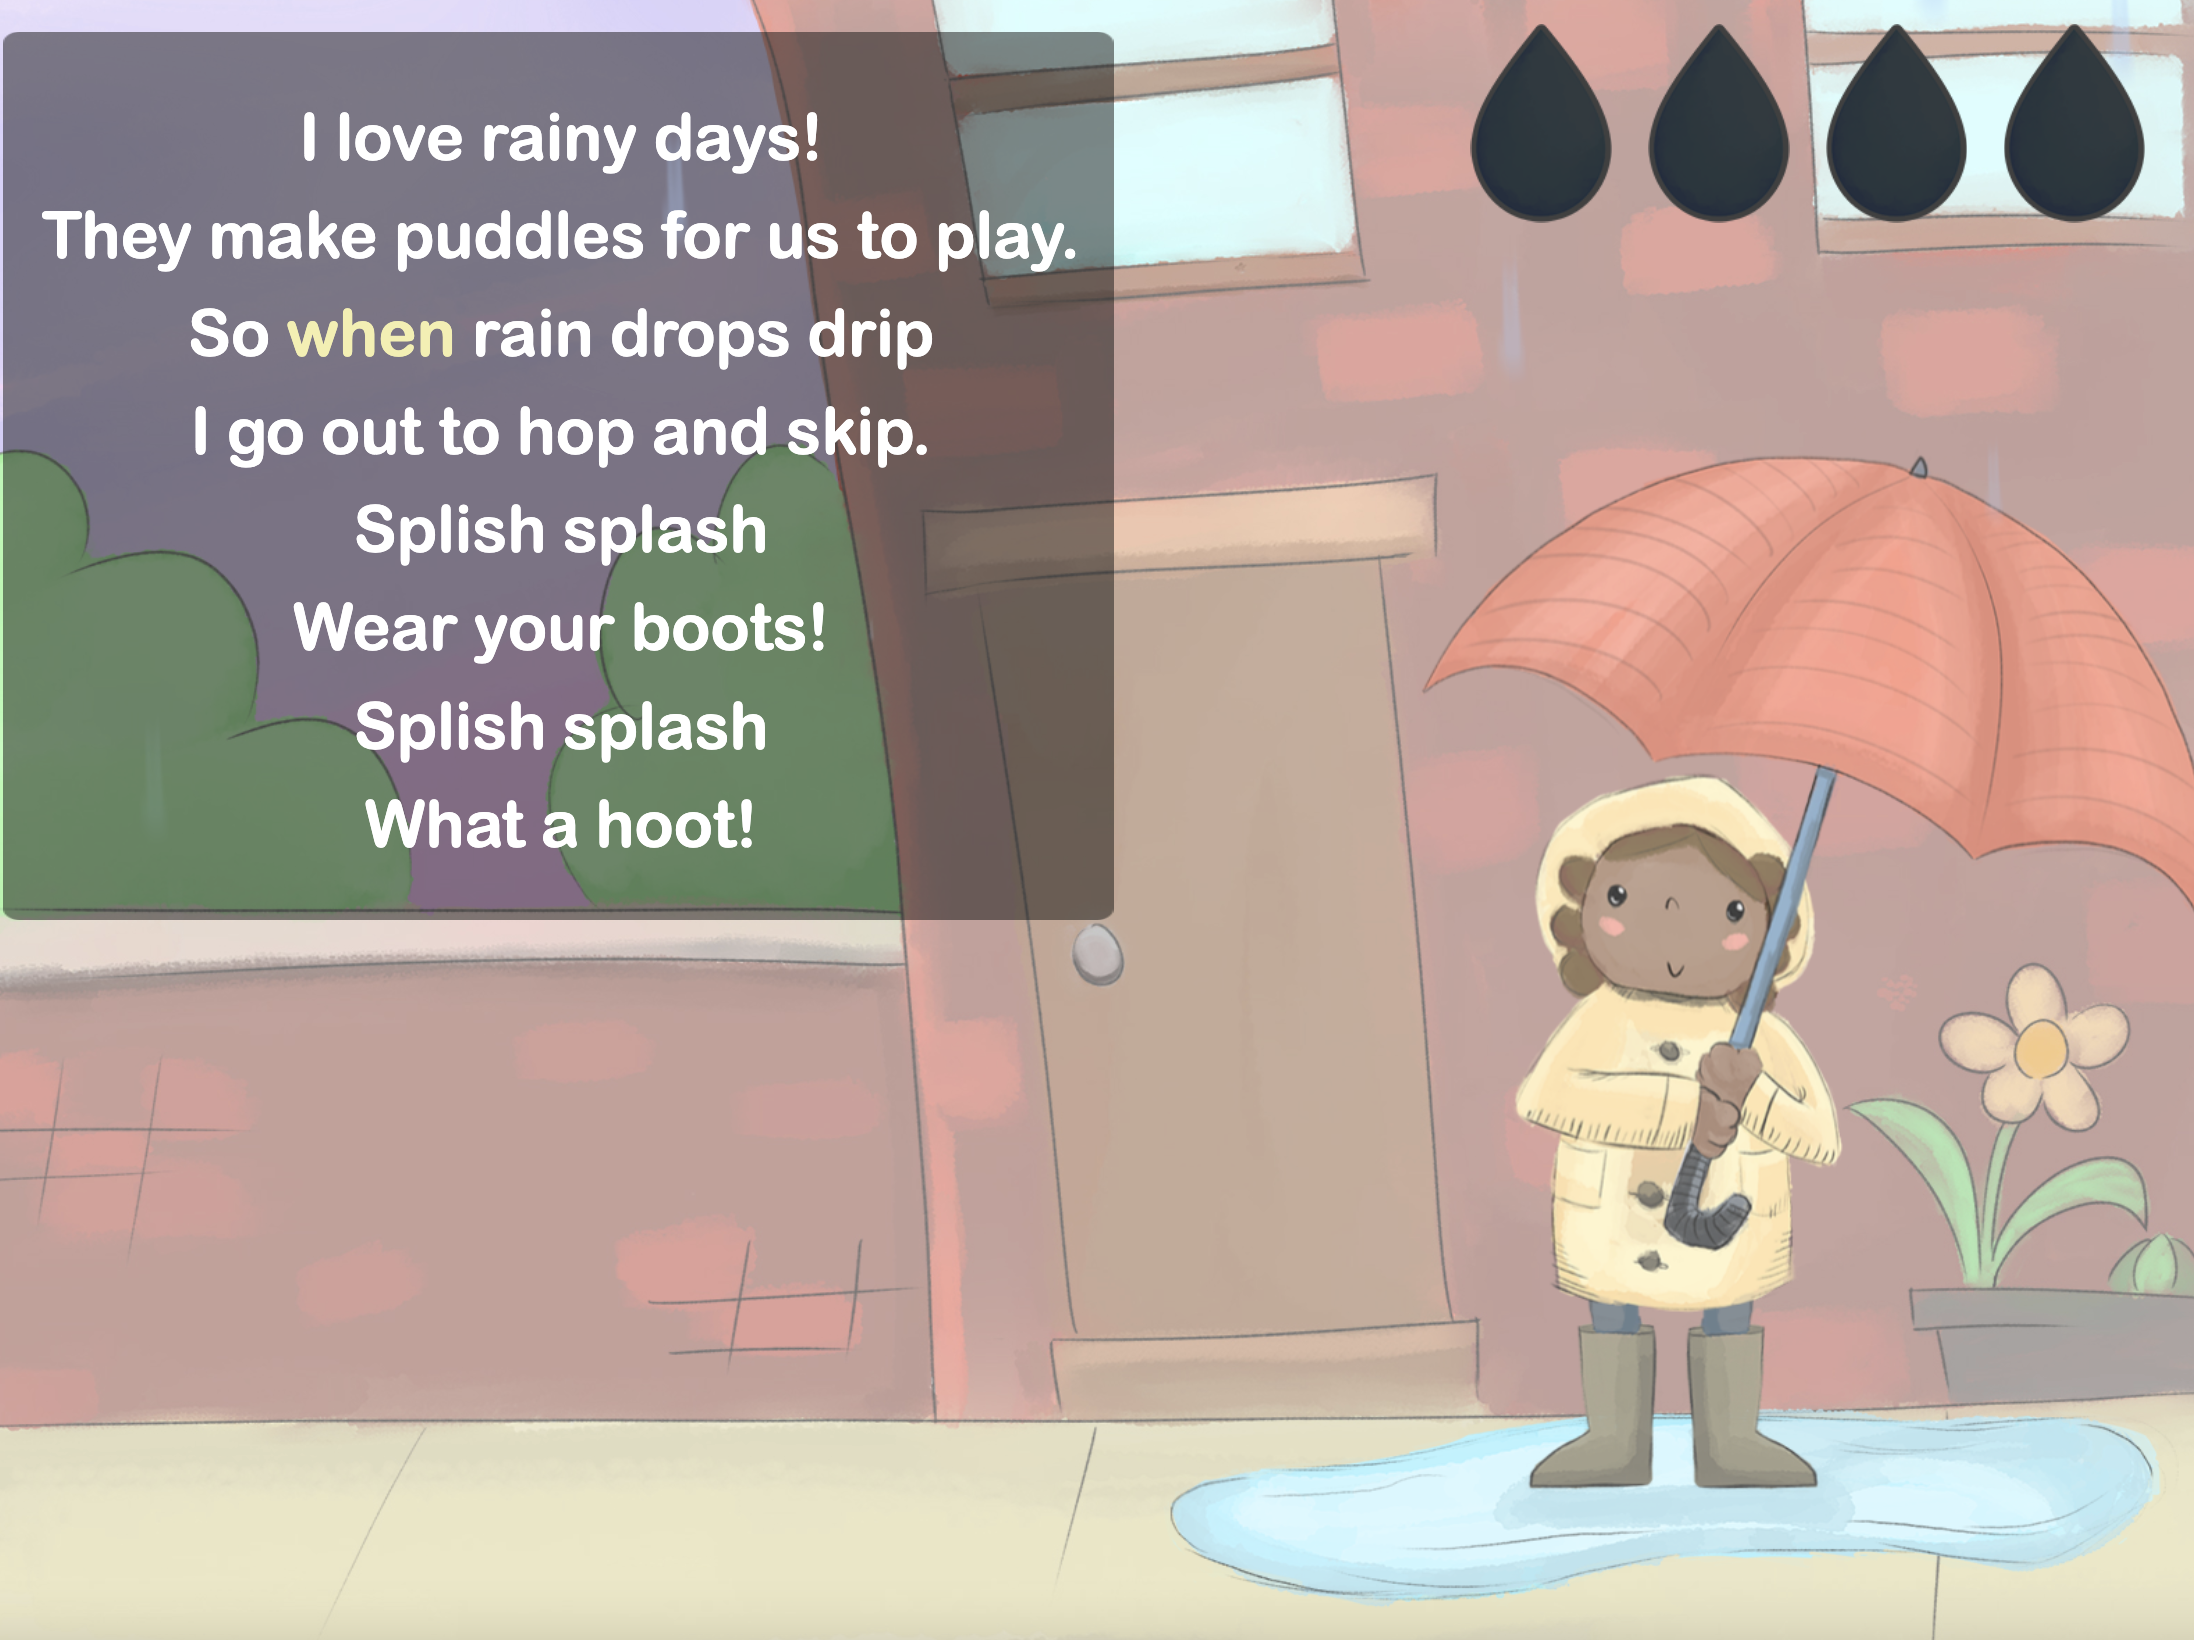 Poem about a girl playing in the rain